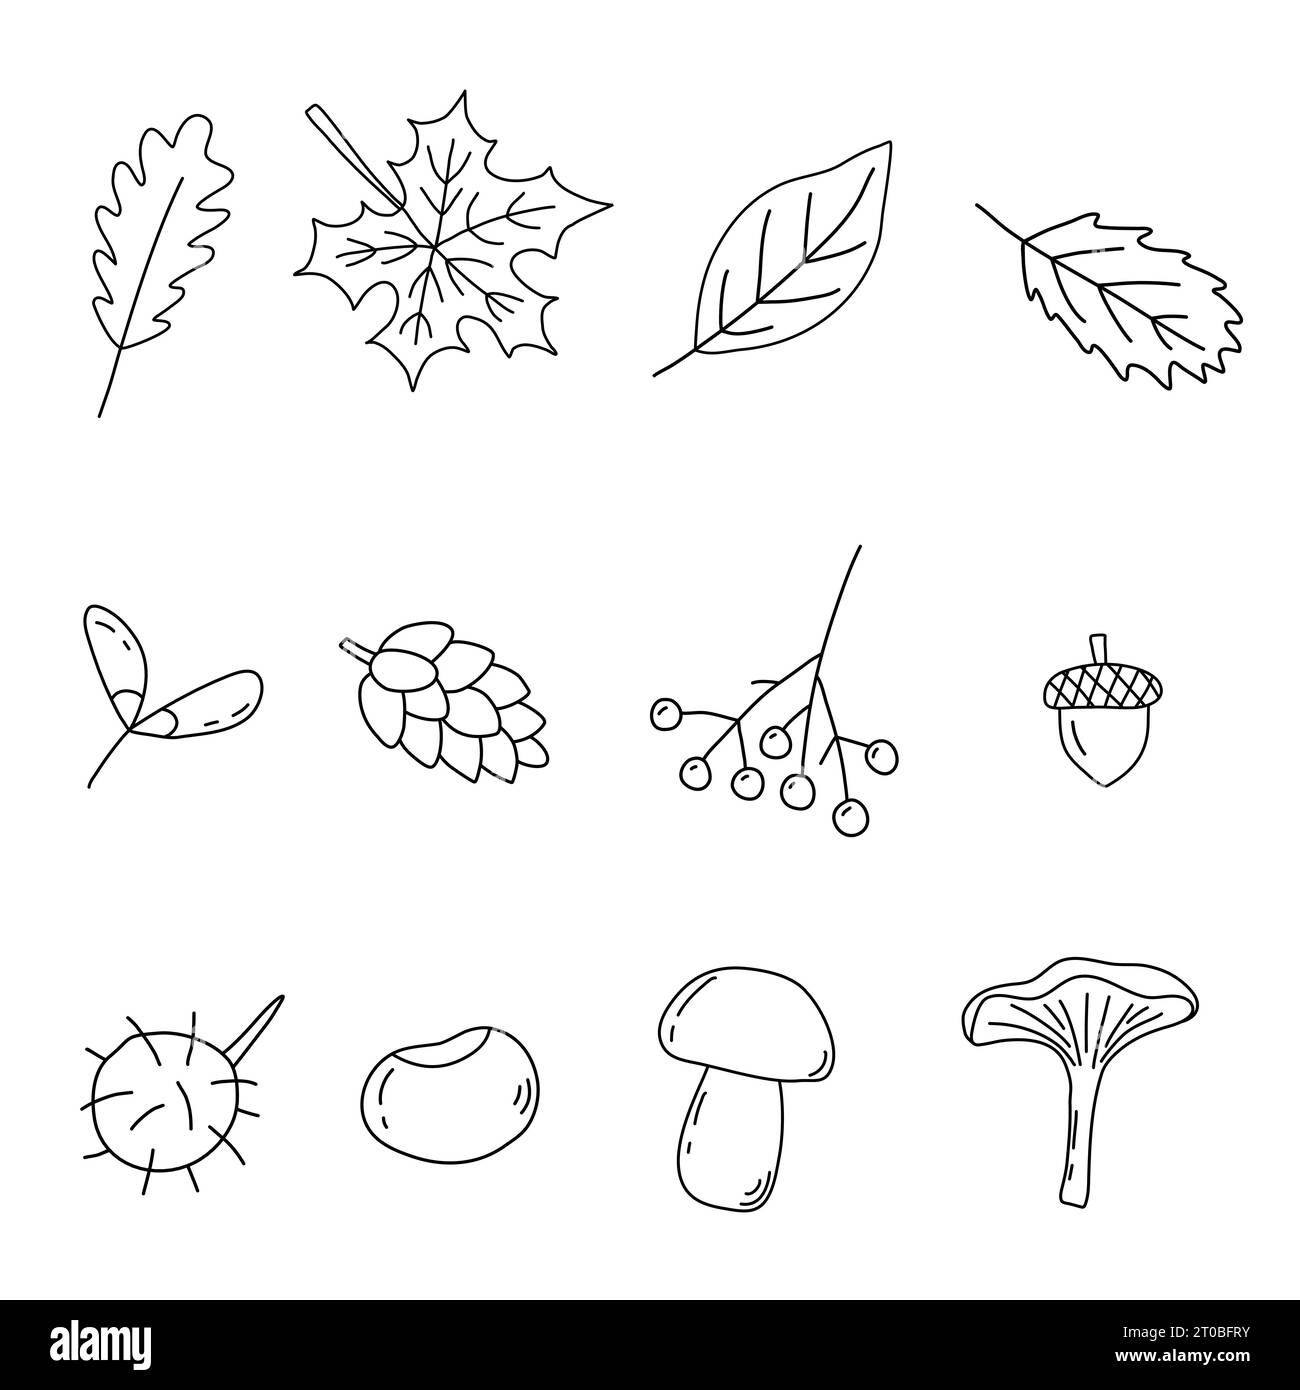 Set of autumn elements, leaves, berry, mushrooms, doodle style flat vector outline illustration for kids coloring book Stock Vector